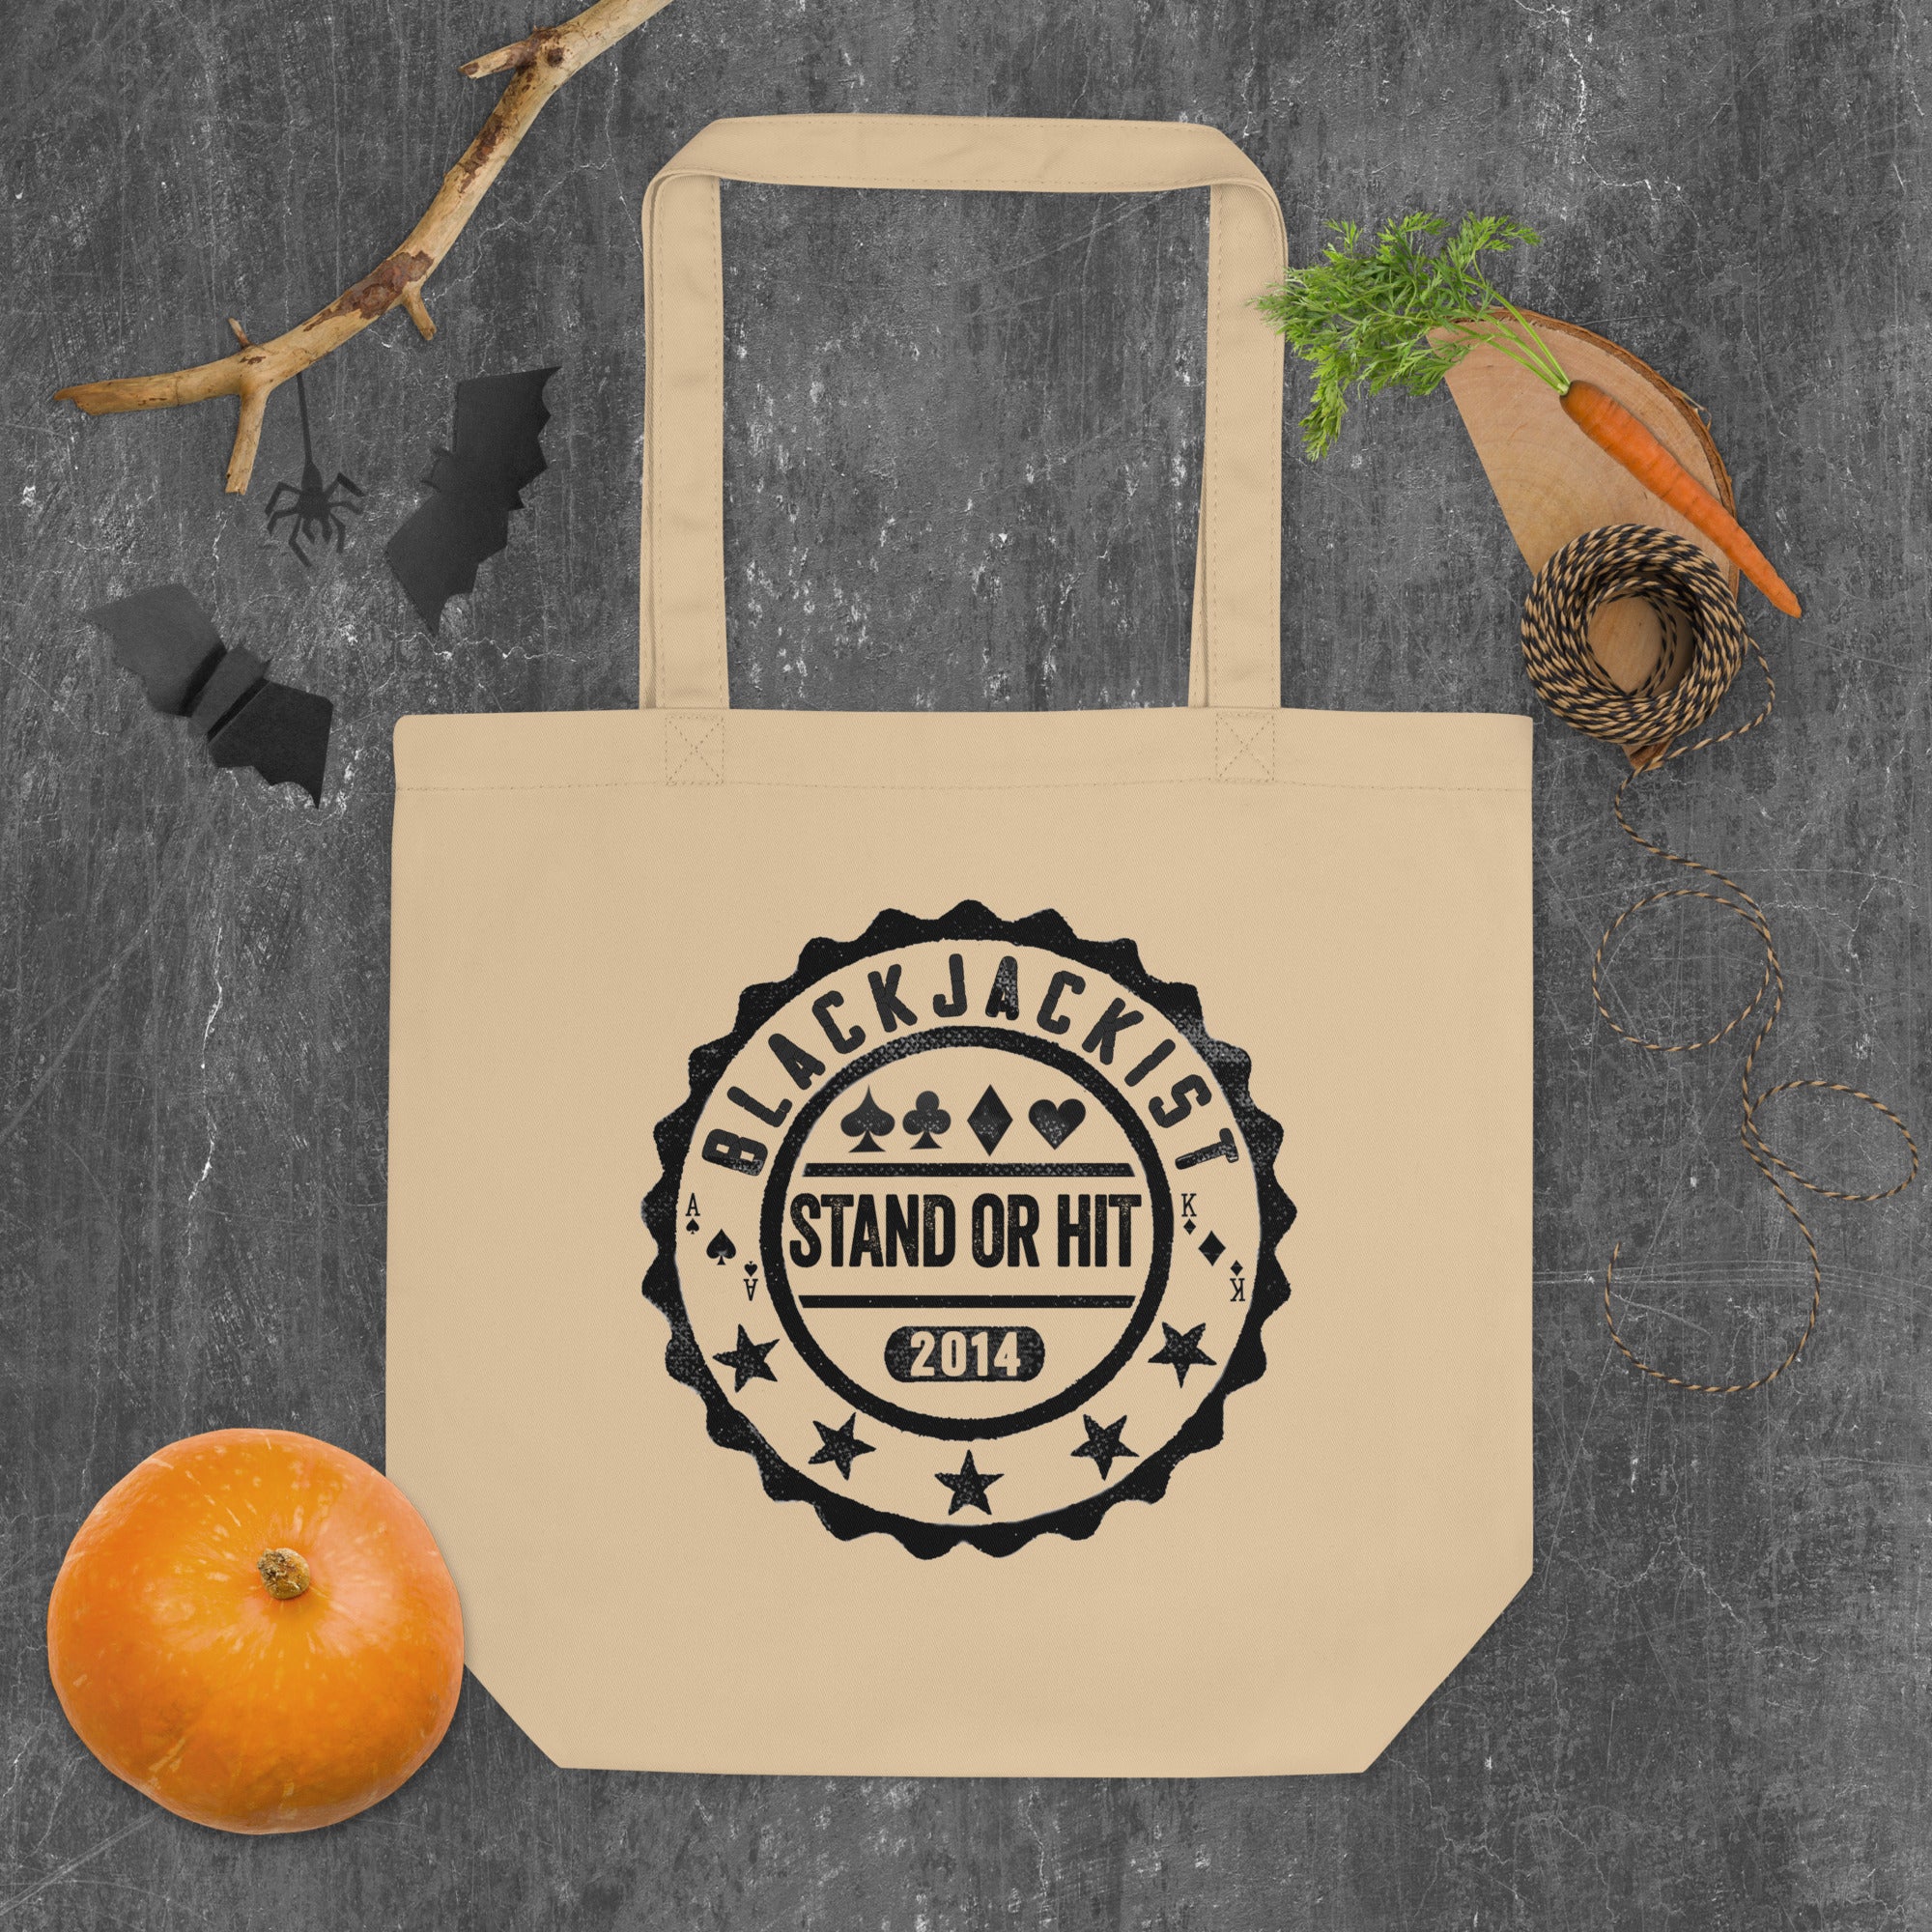 Stand or Hit - Eco Tote Bag - Pokerist